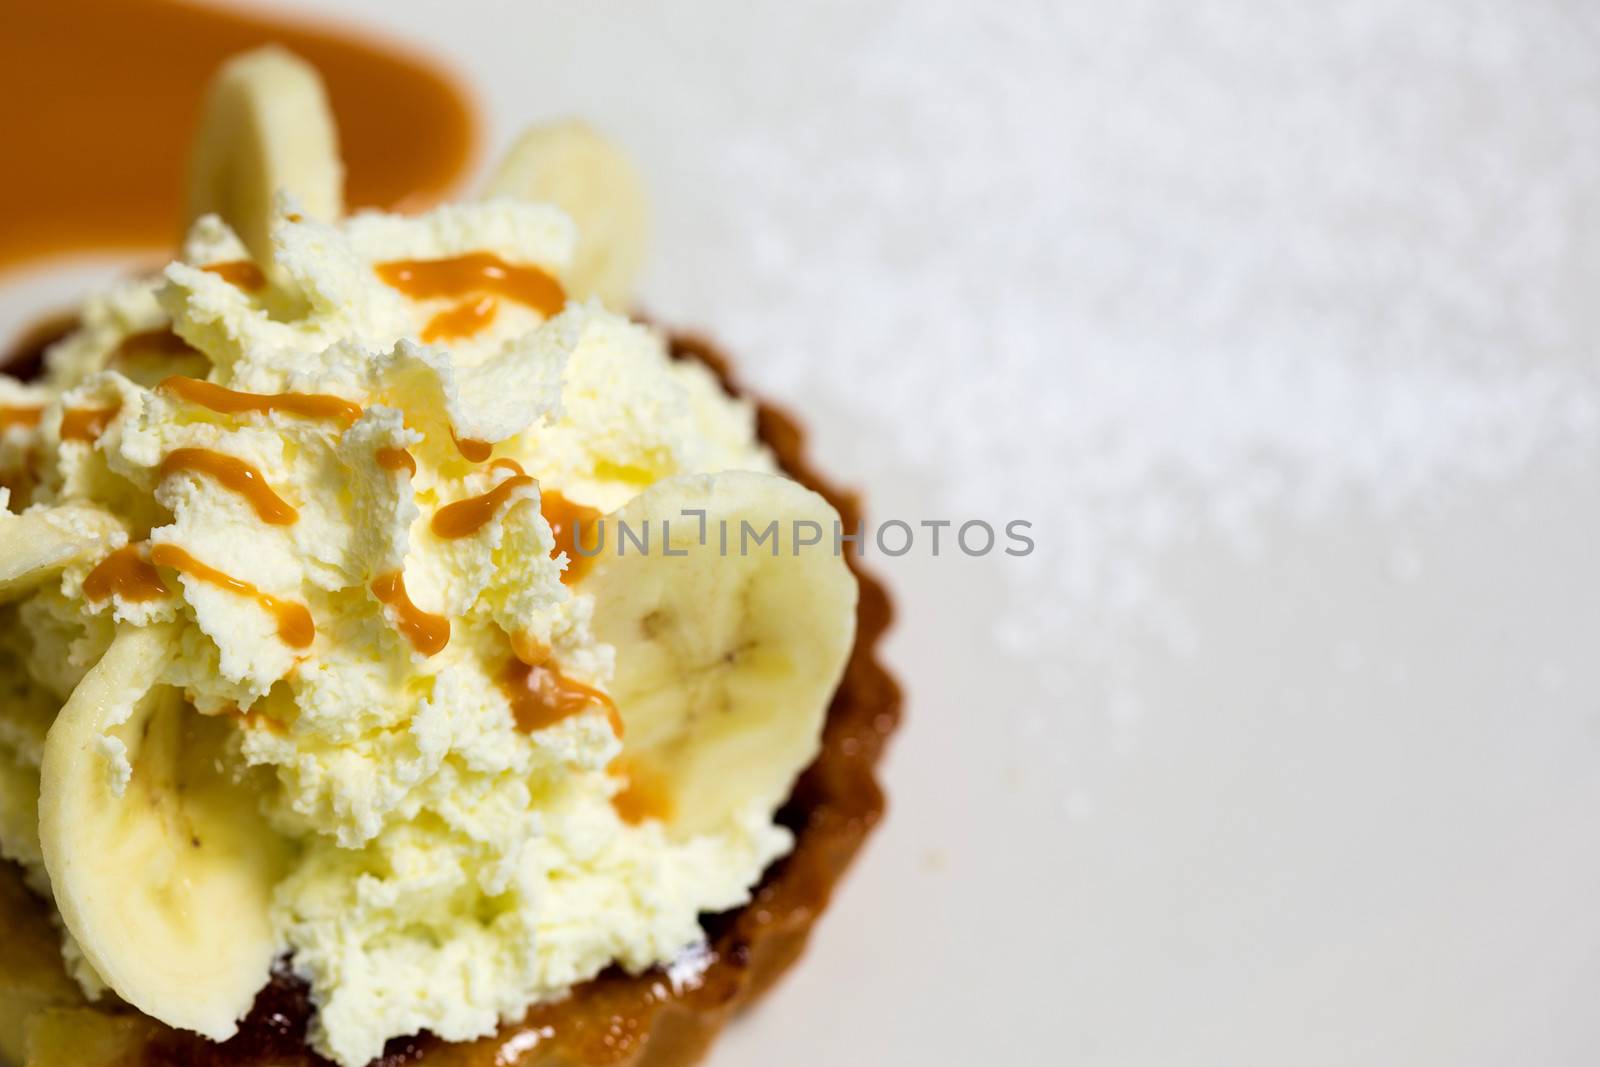 A fresh banana cream pie ready to be served to guests. Toppings of honey